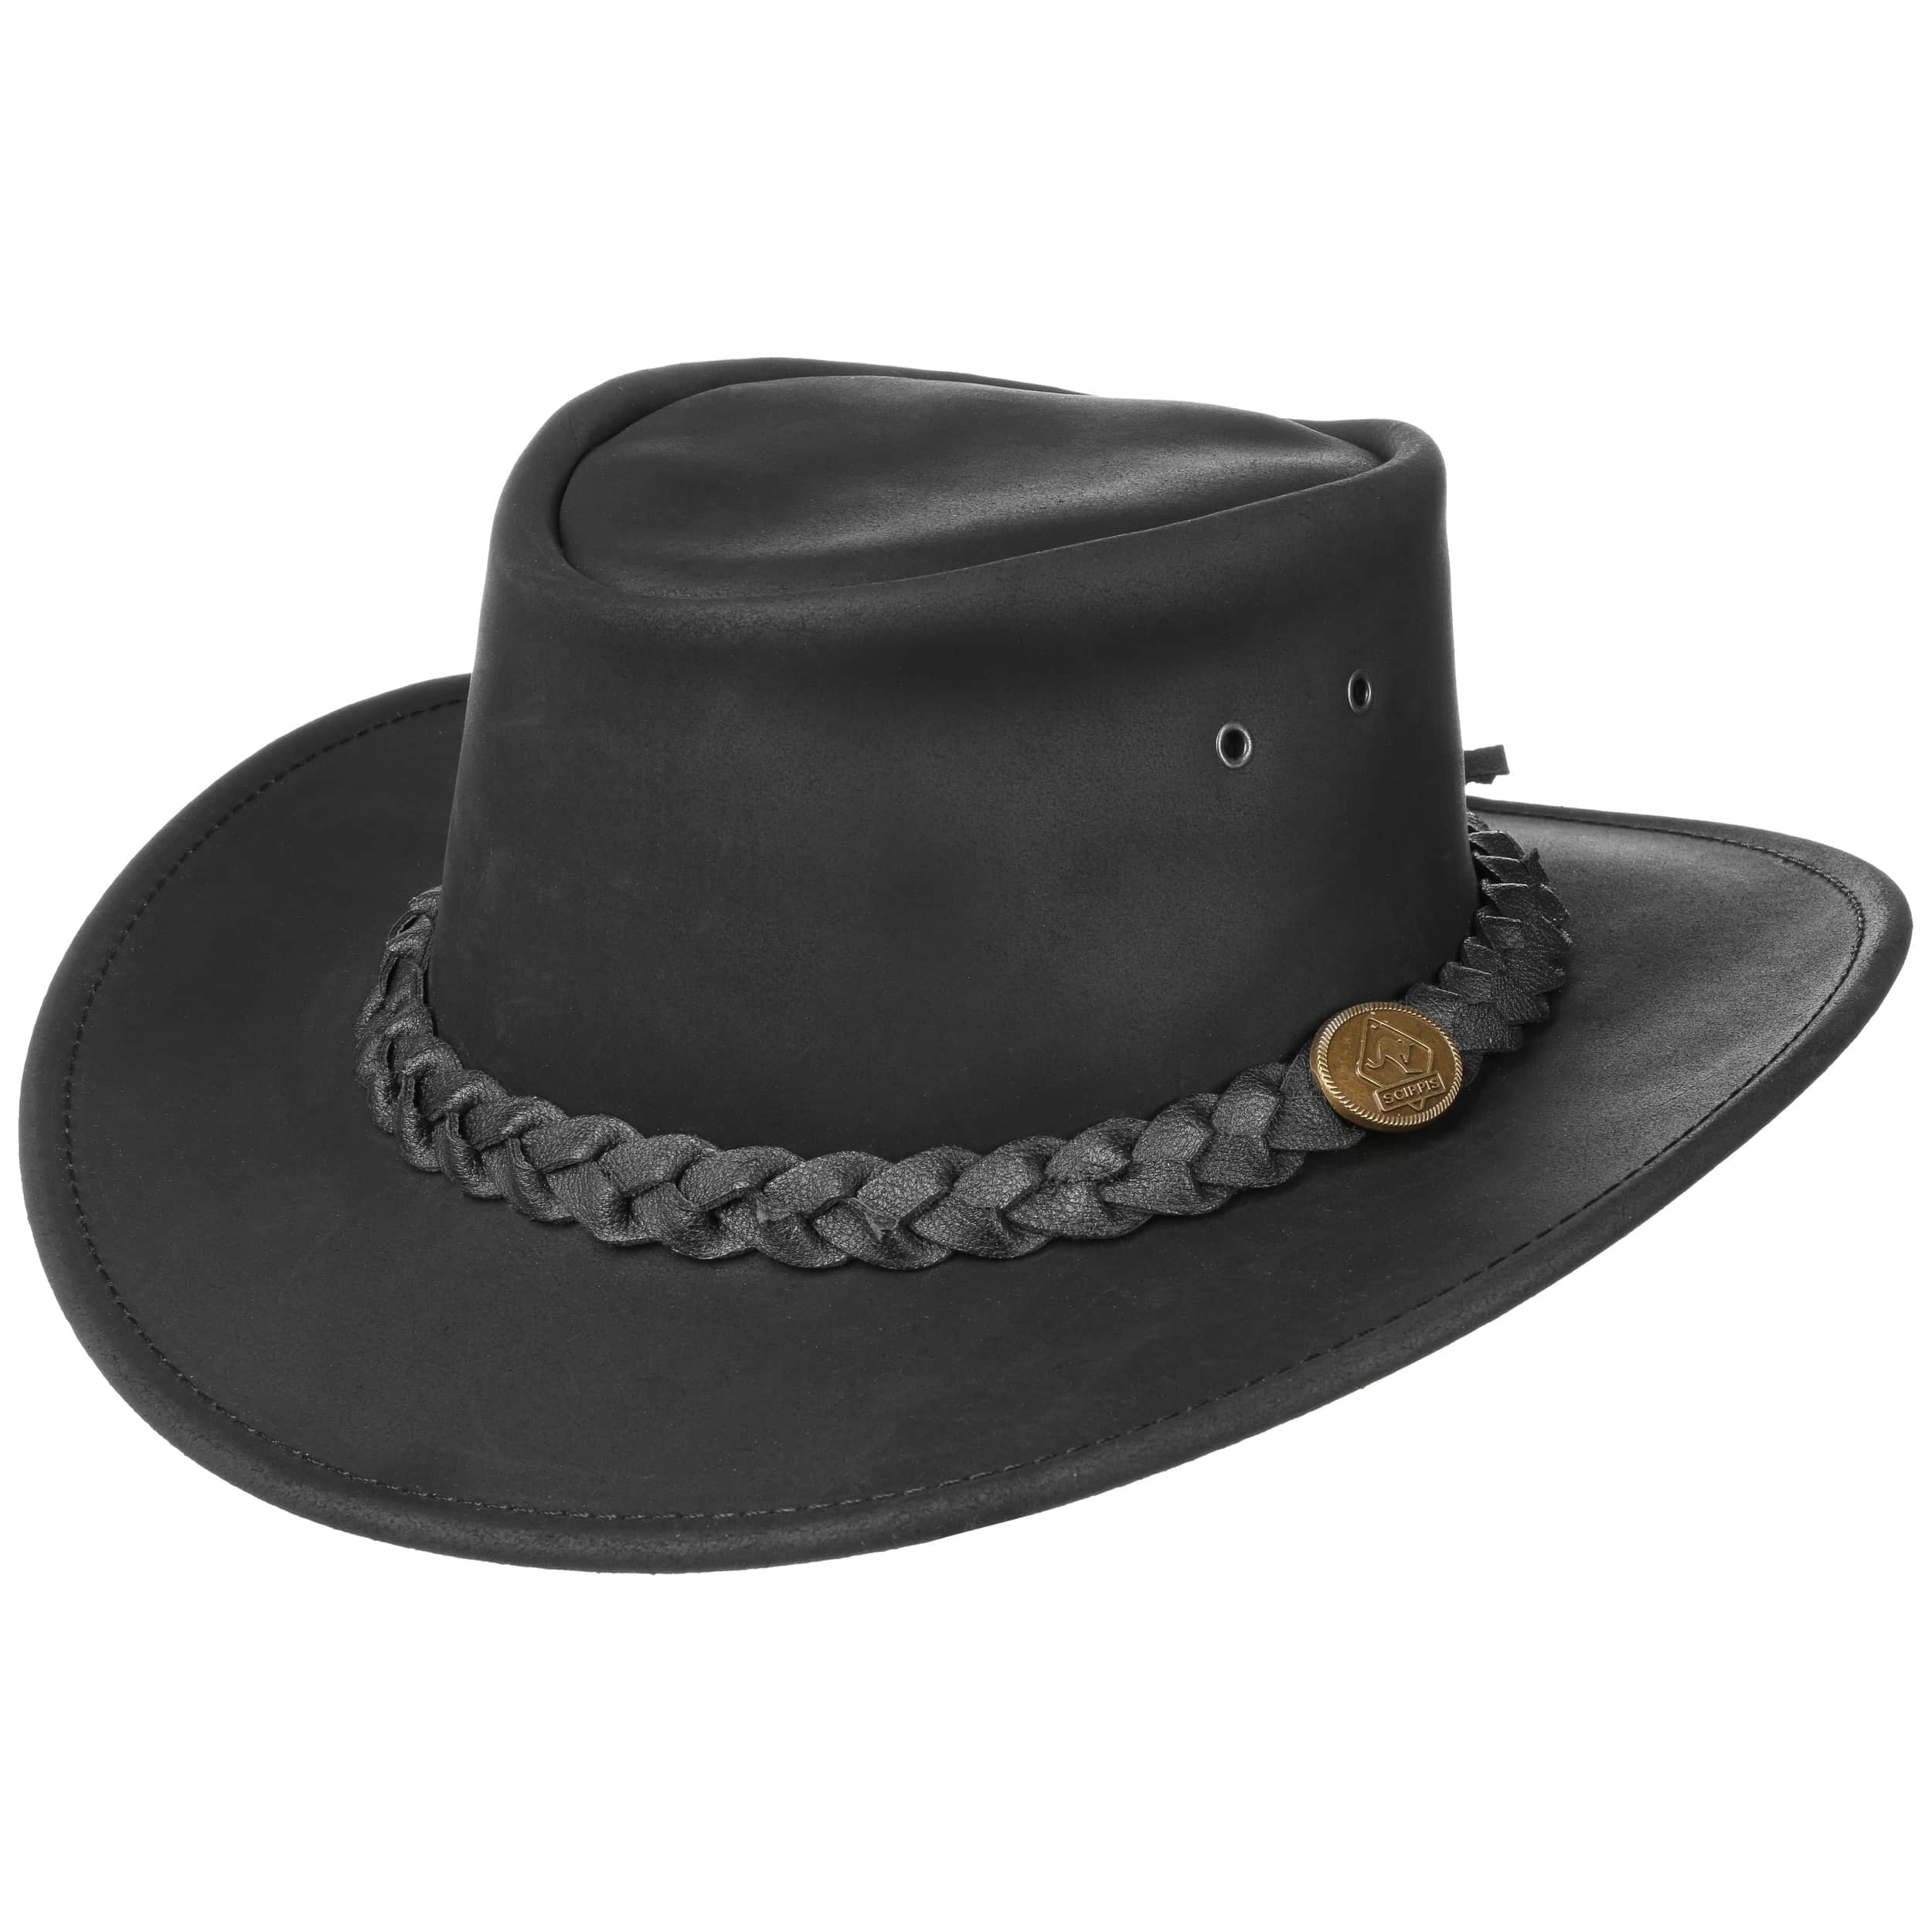 Bushman Leather Hat by Scippis - 83,95 €